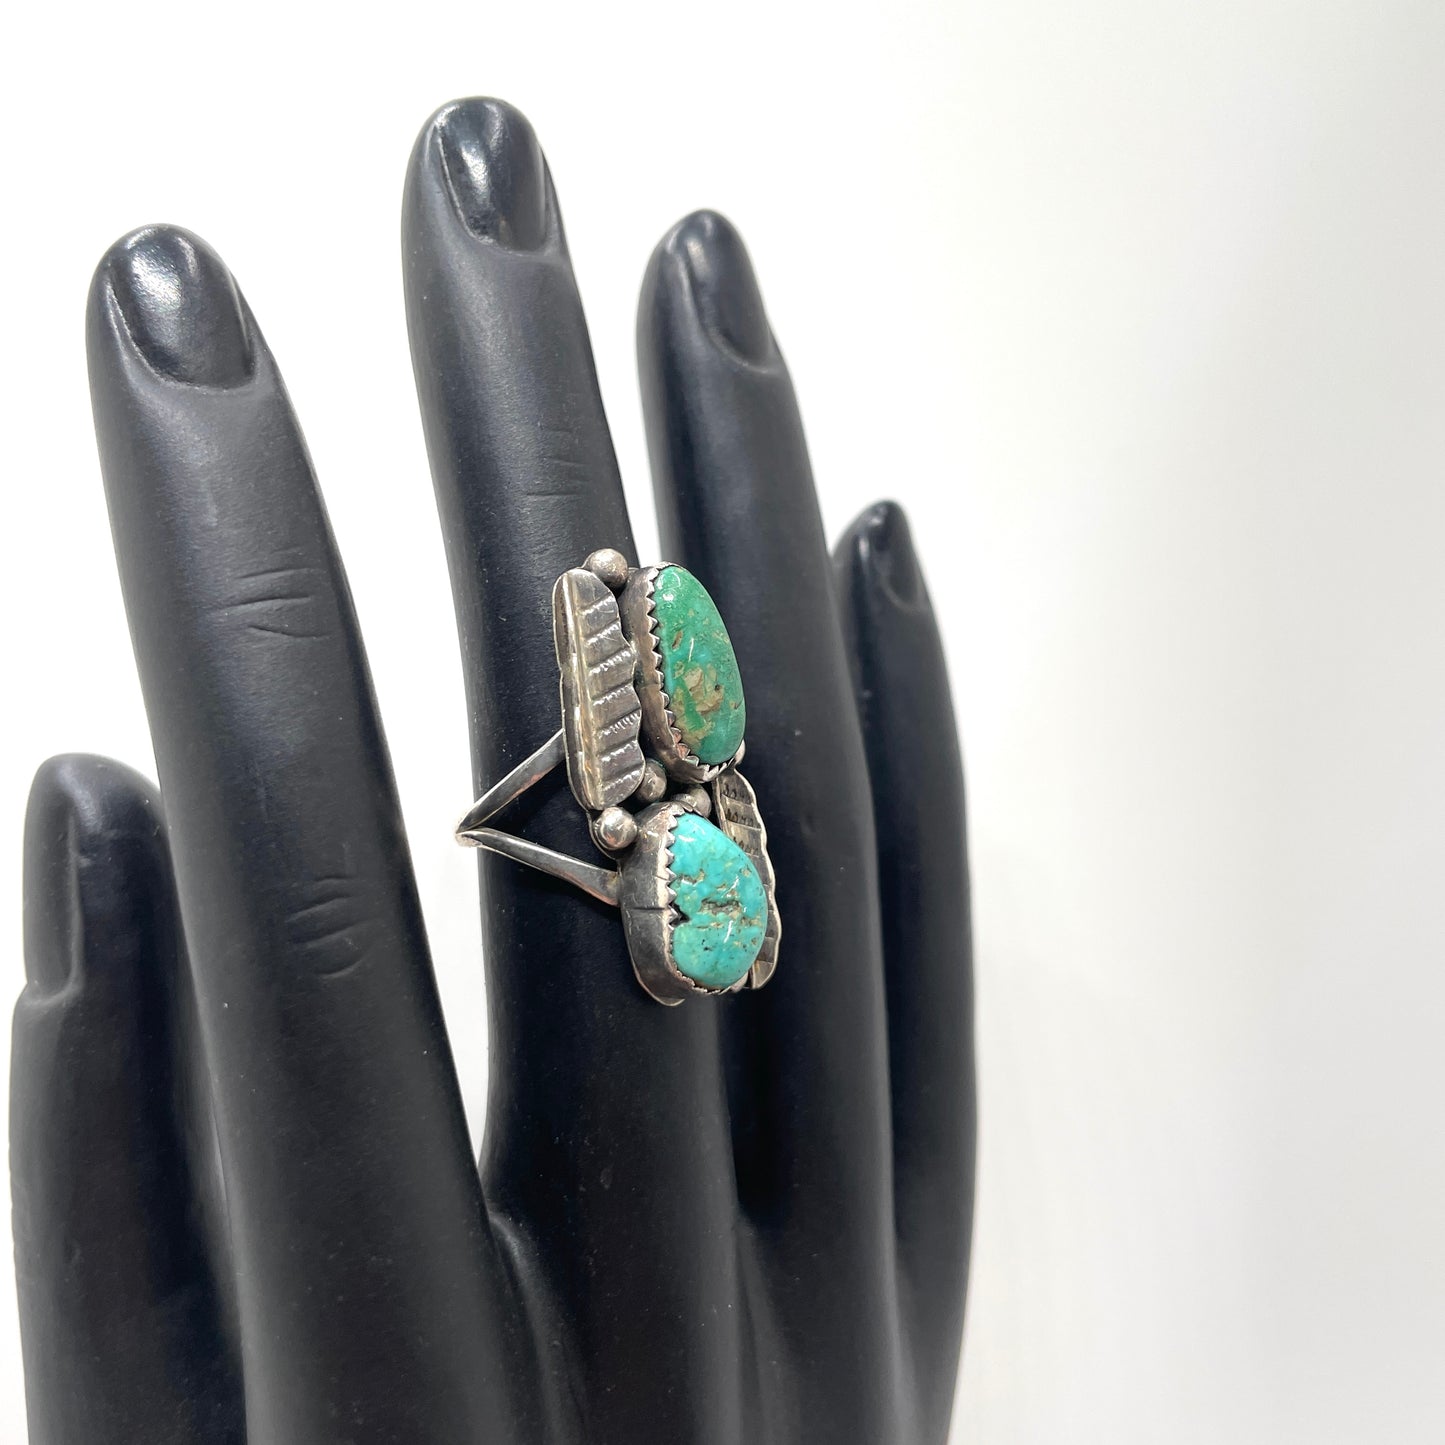 Vintage Sterling Silver & Turquoise Ring - Size 7